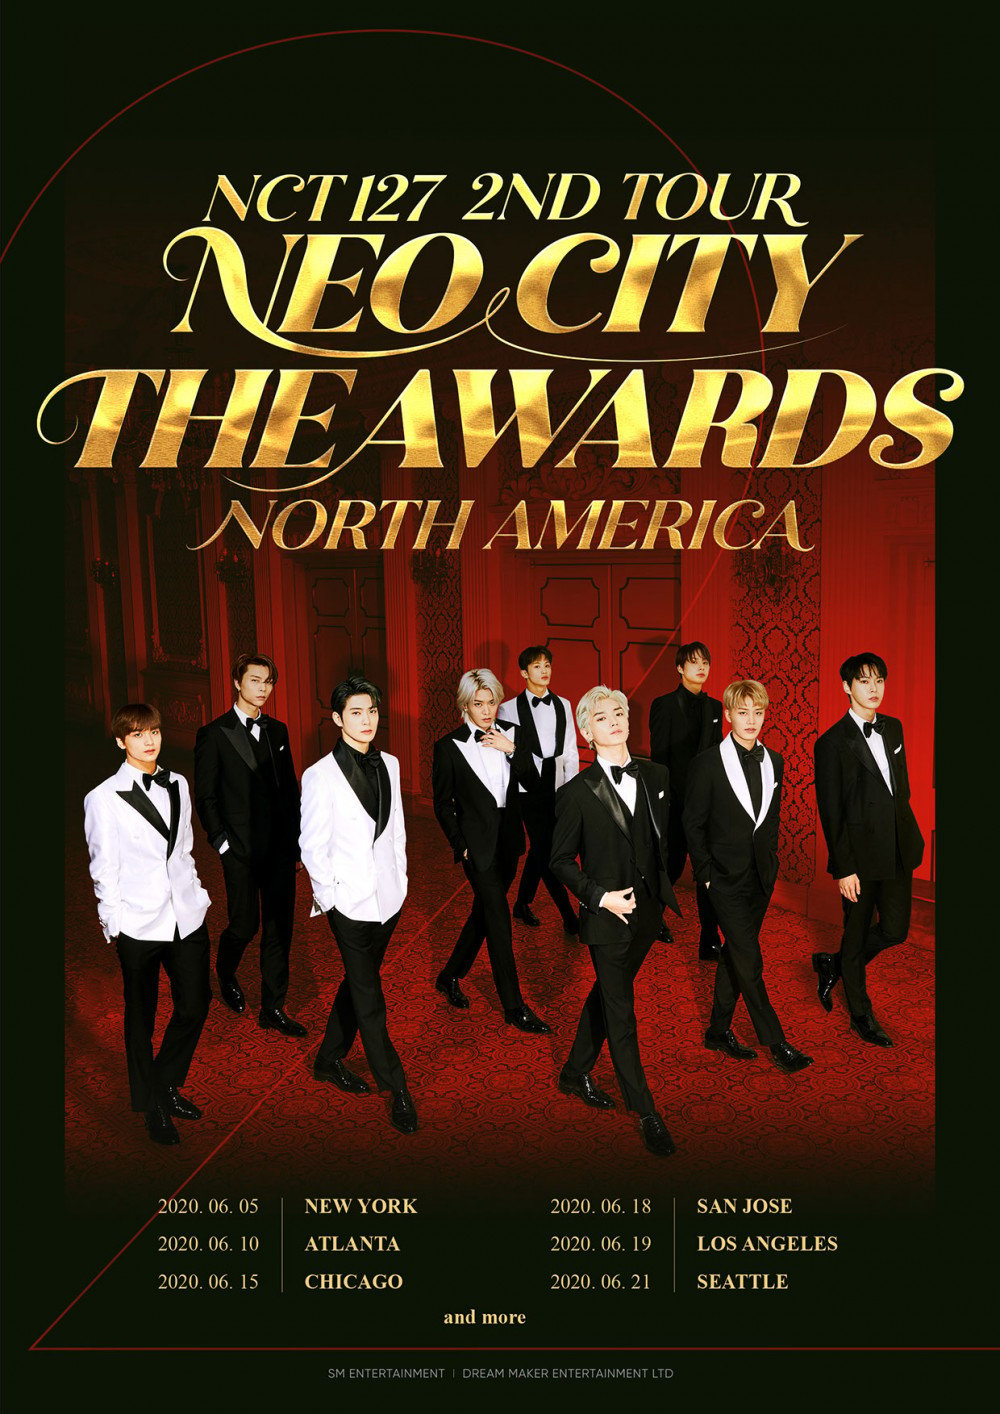 NCT 127 announce dates & cities for their 2020 North American tour